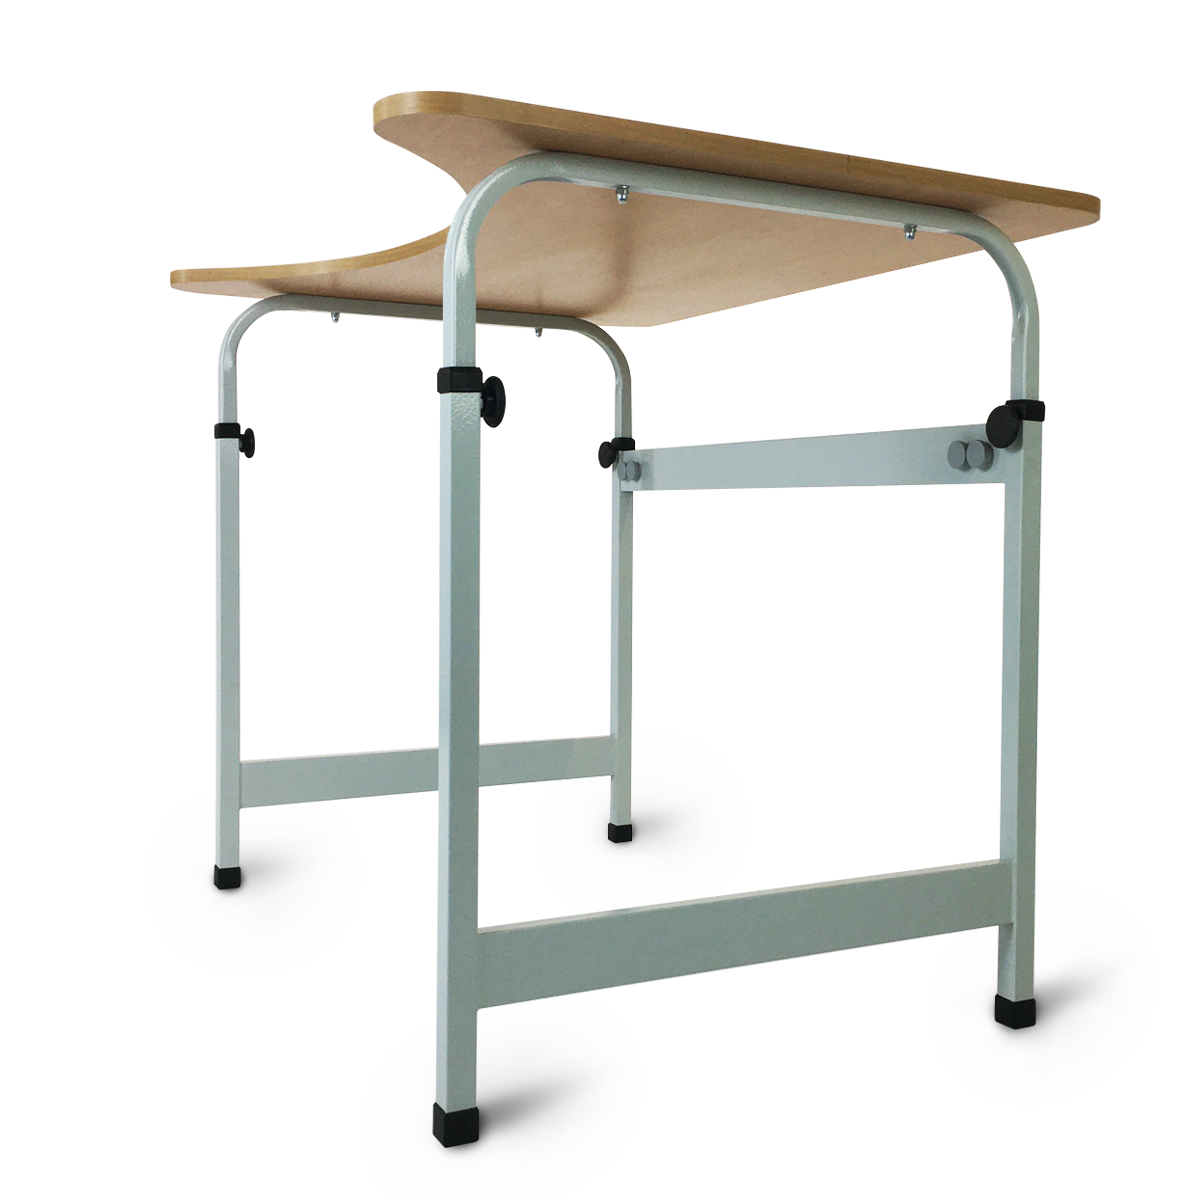 Desk for people with disabilities